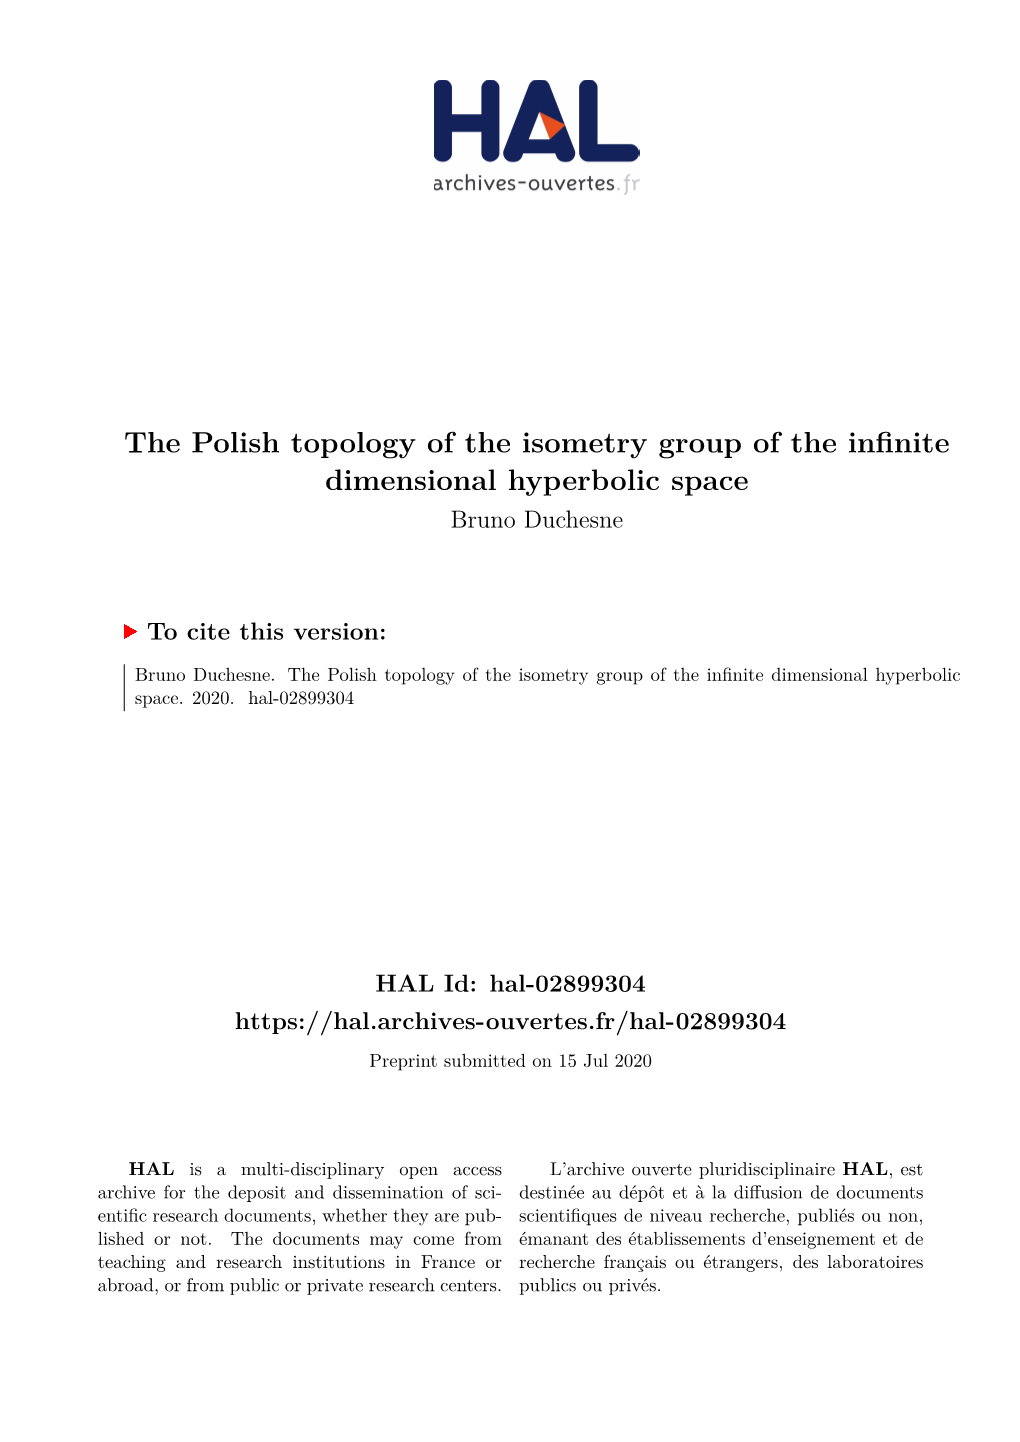 The Polish Topology of the Isometry Group of the Infinite Dimensional Hyperbolic Space Bruno Duchesne